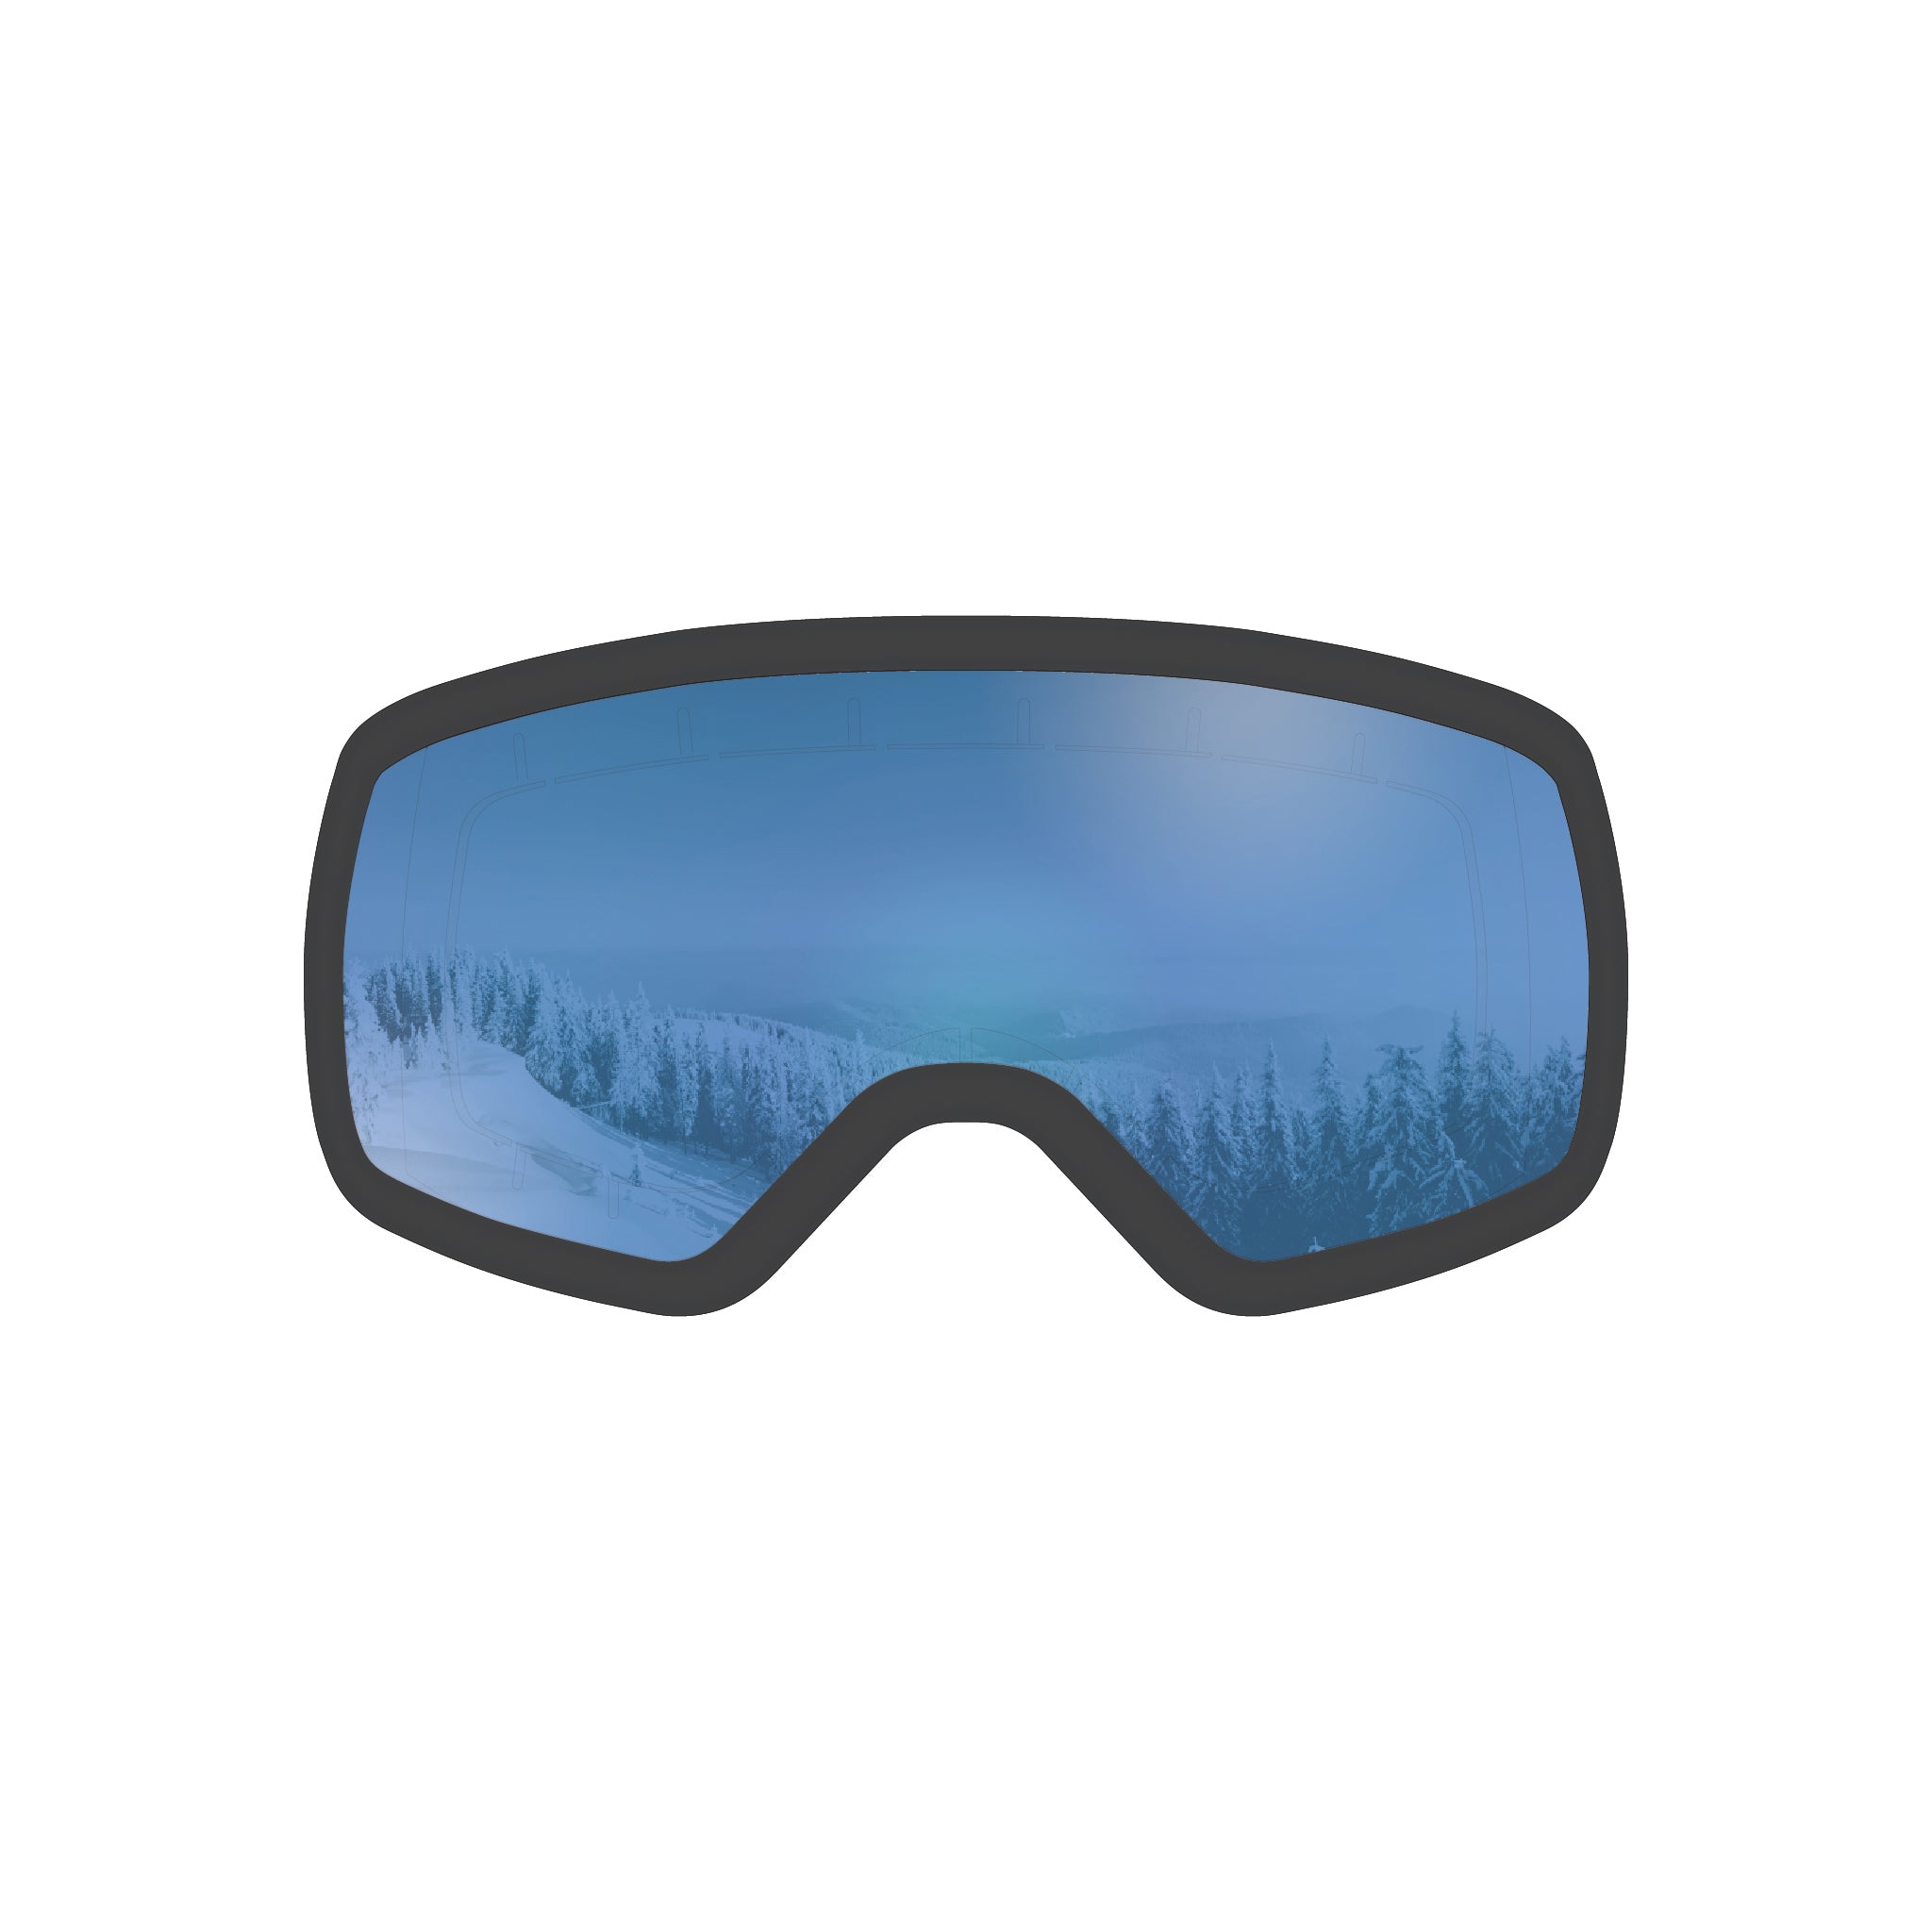  Blue Revo Lens and Black Frame - Fits teens, ages 9 -13. Youth ski goggle.